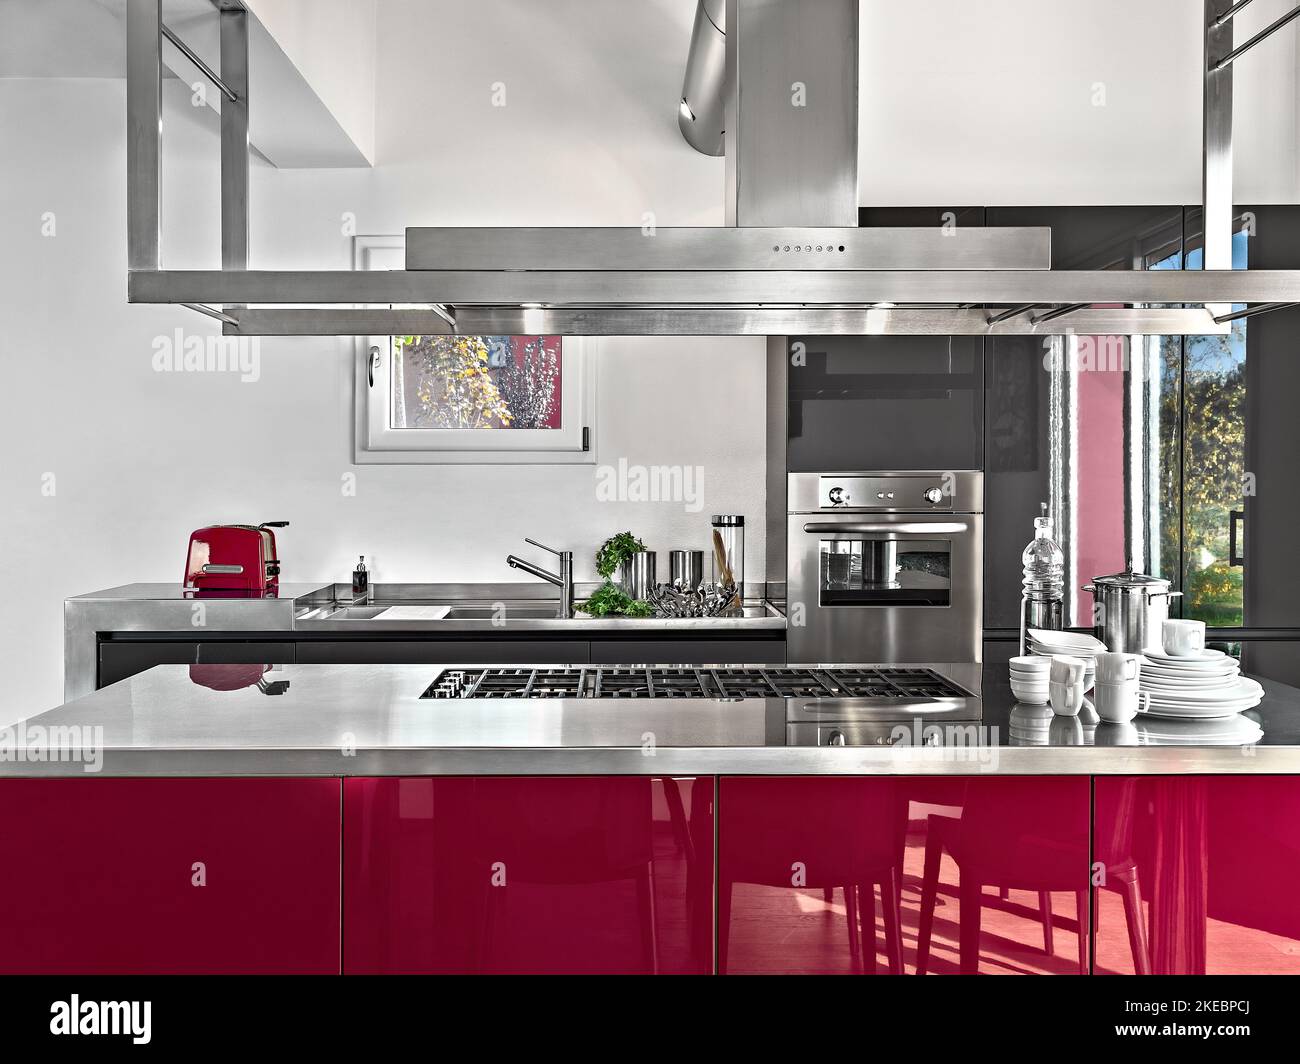 interior of a modern kitchen in the foreground the island kitchen with gas hob and the extractor hood in the background the integrated oven and the si Stock Photo